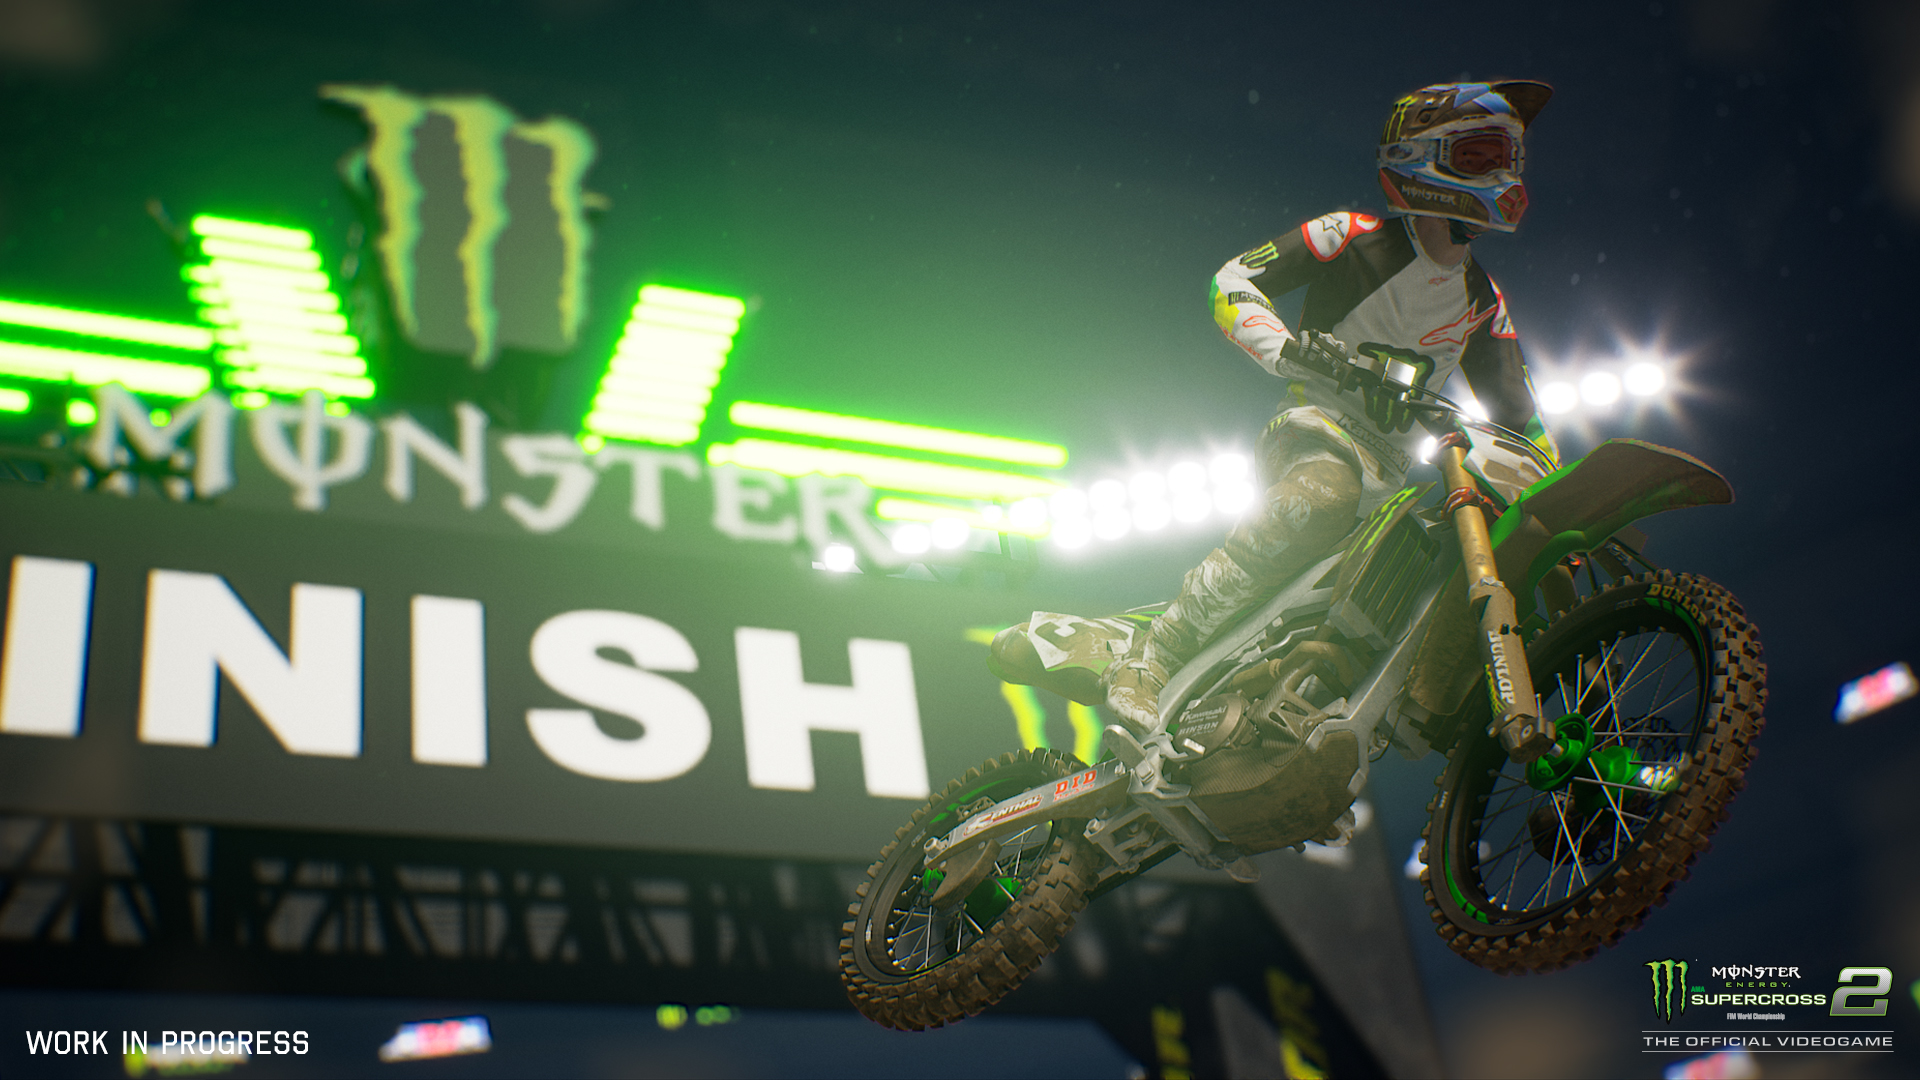 How To Perform A Scrub In Monster Energy Supercross 2 Gamespew